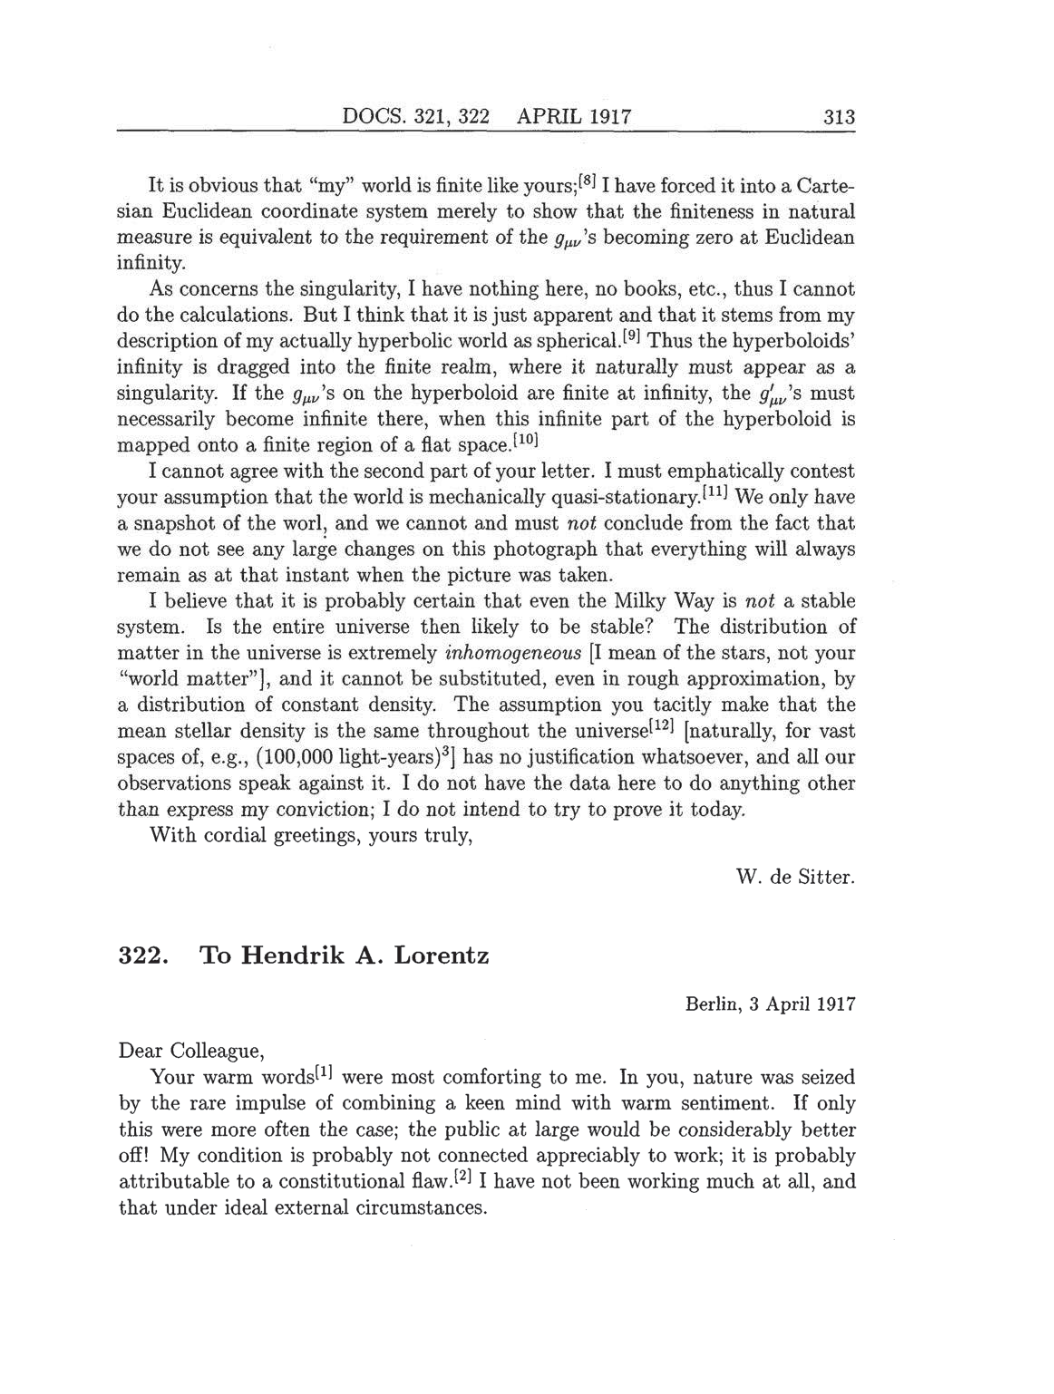 Volume 8: The Berlin Years: Correspondence, 1914-1918 (English translation supplement) page 313